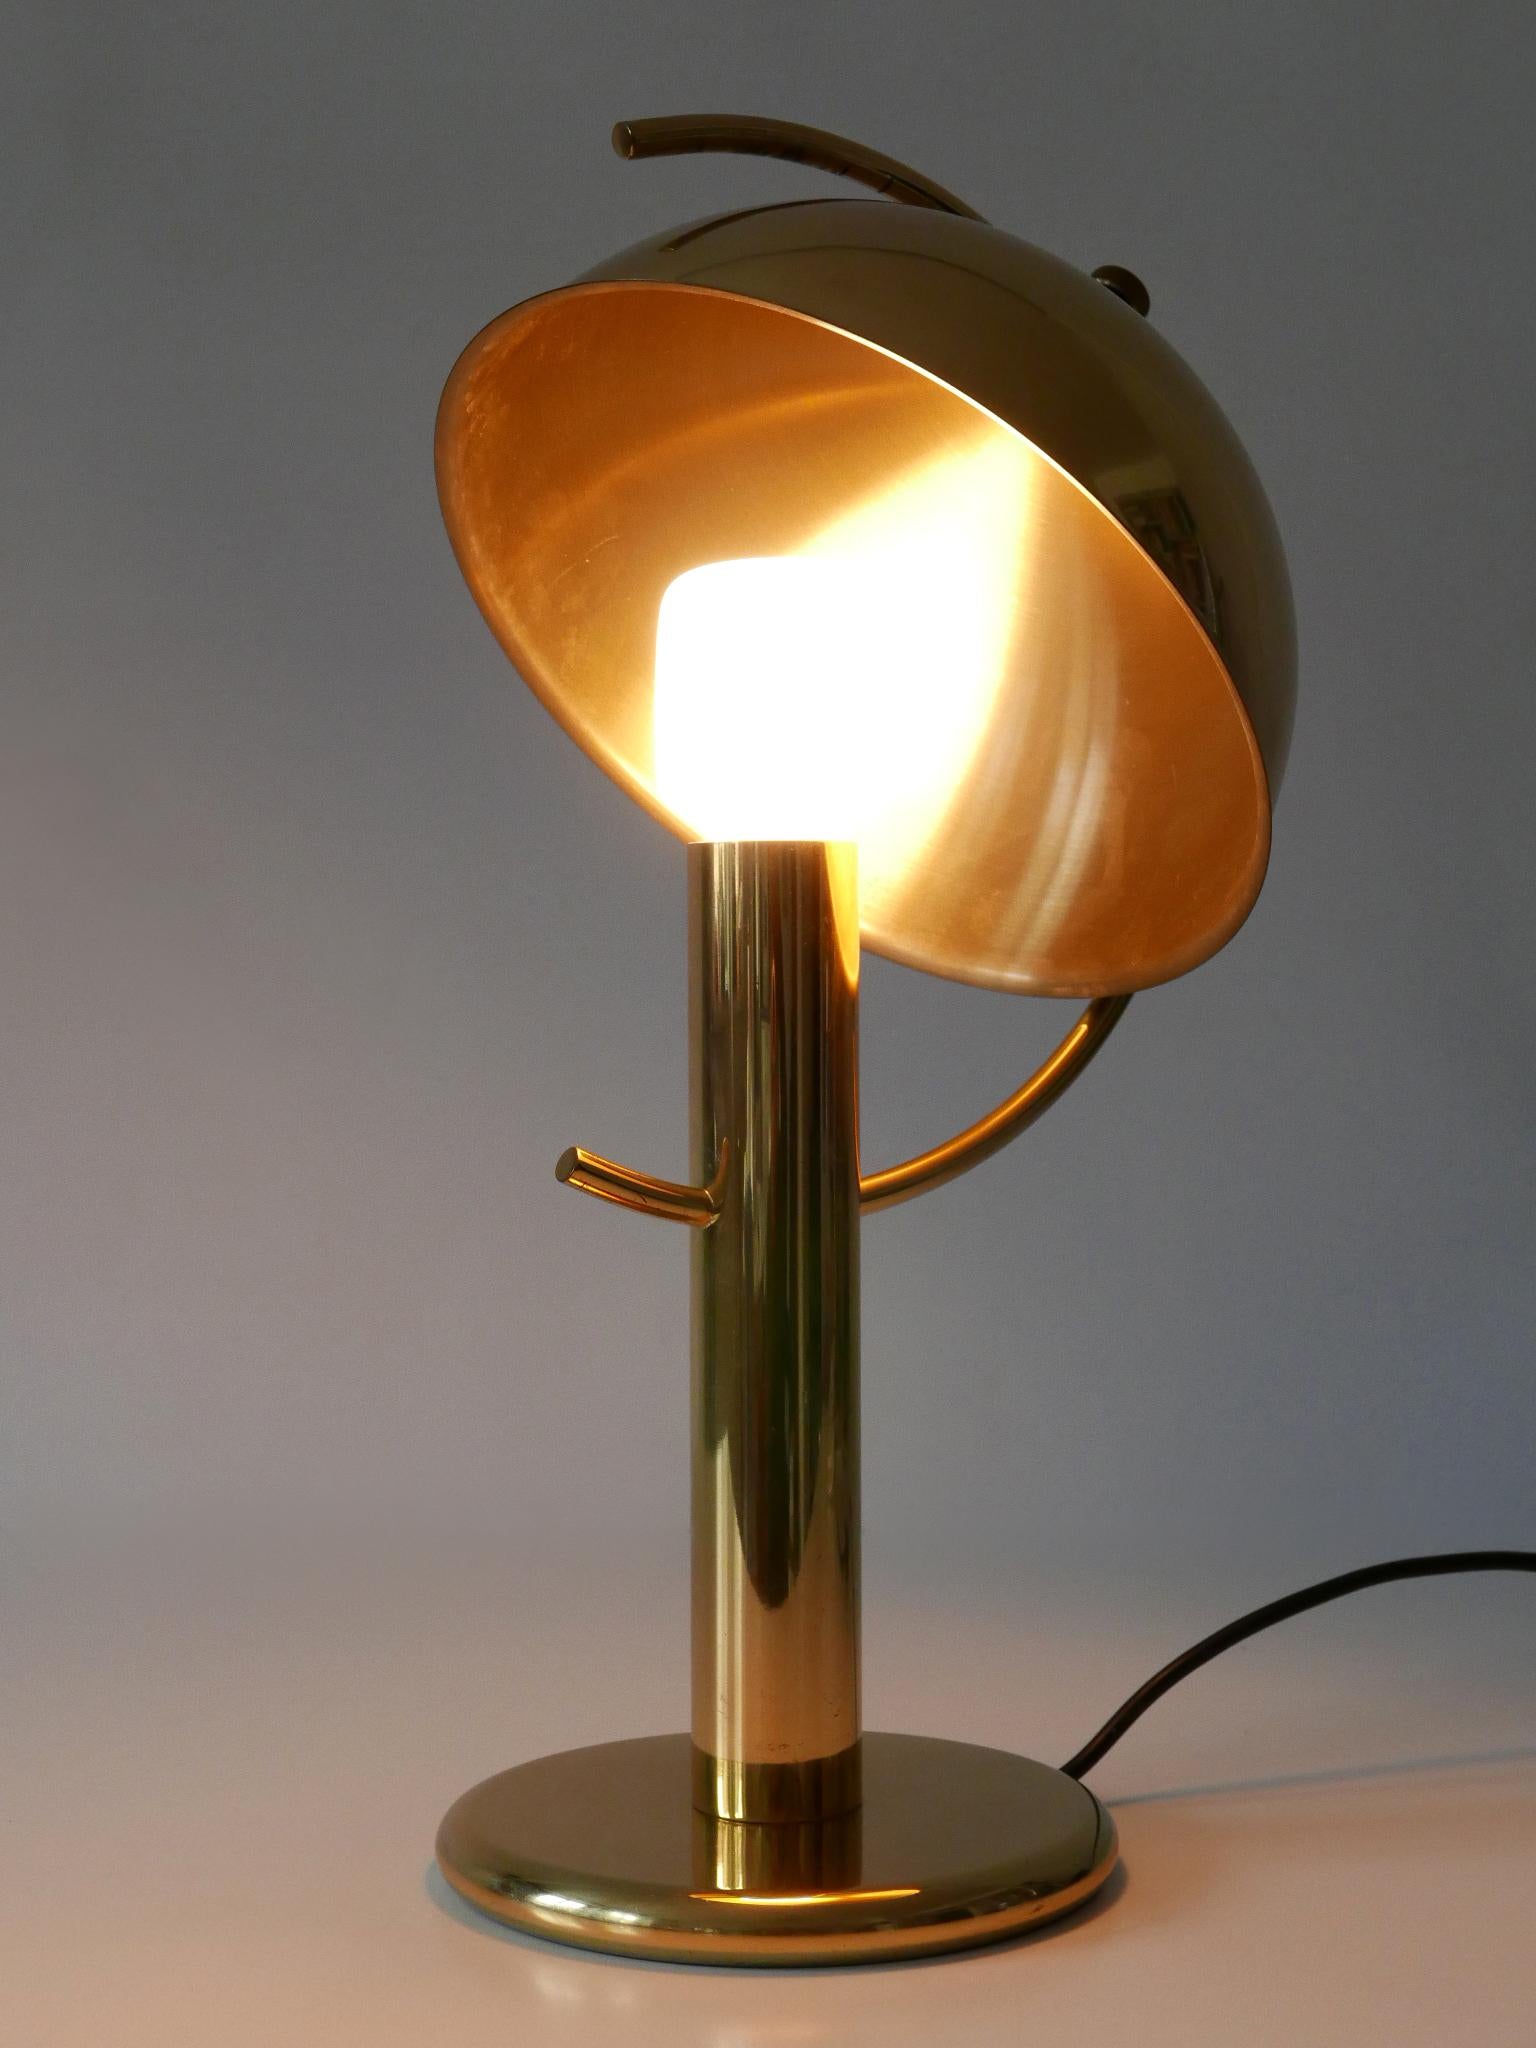 Exceptional Mid-Century Modern Brass Table Lamp by Gebrüder Cosack Germany 1960s For Sale 6